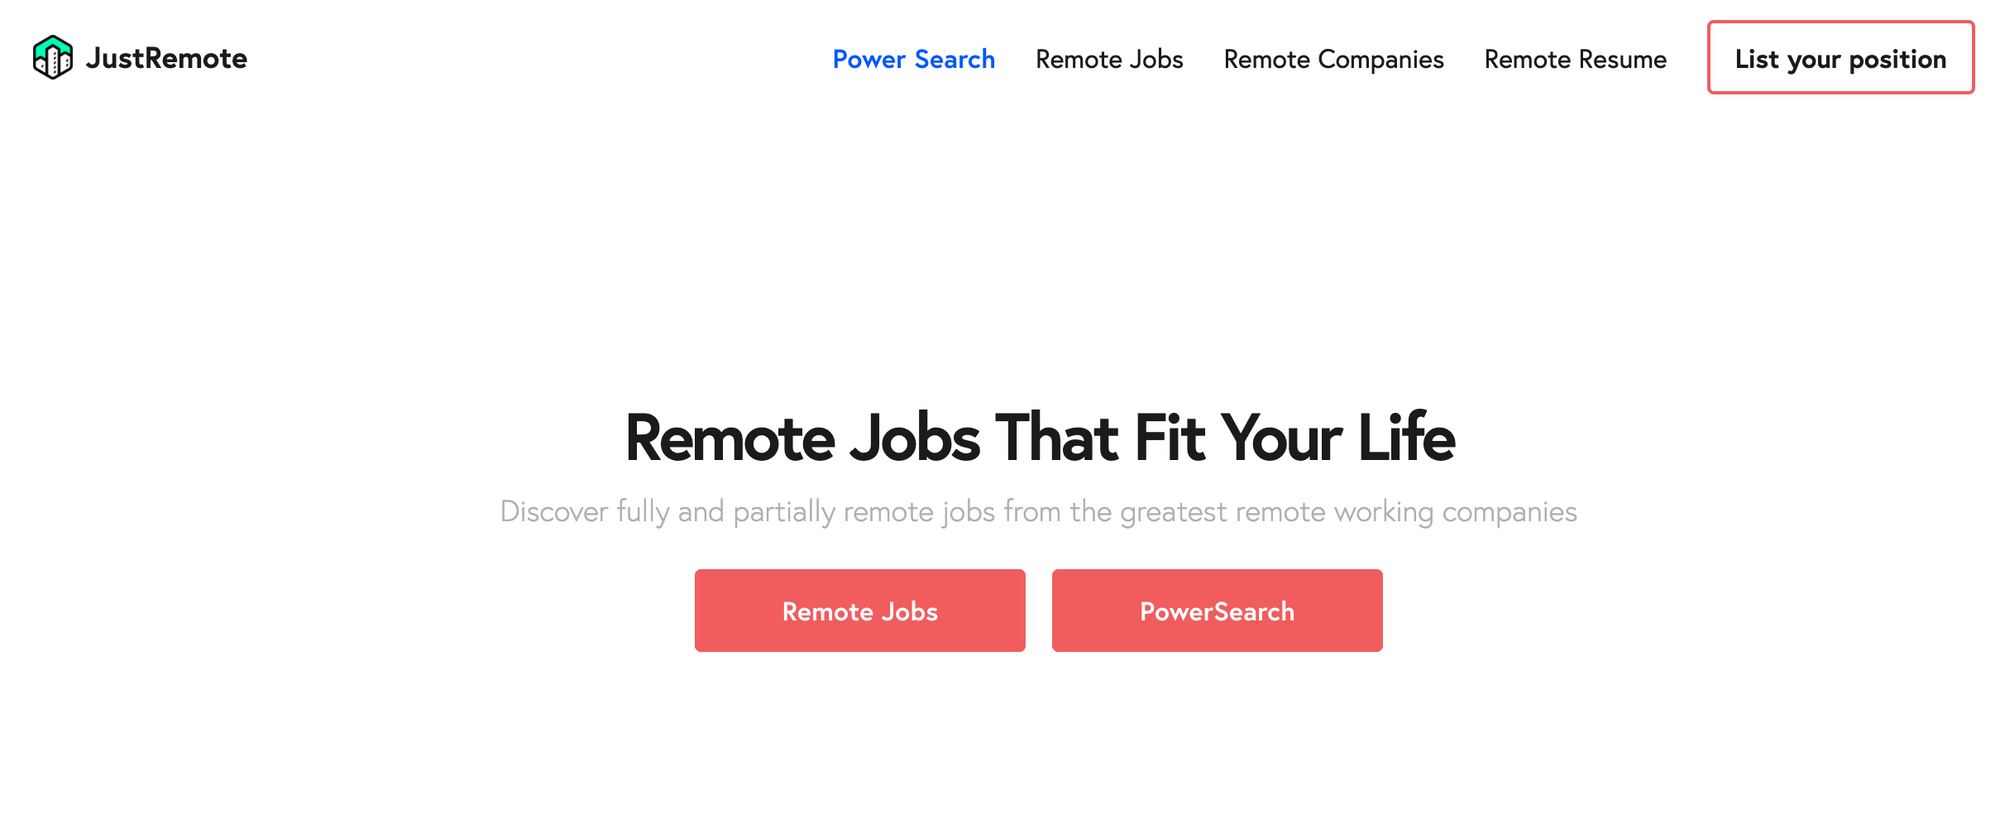 JustRemote.co, a great website to find remote jobs